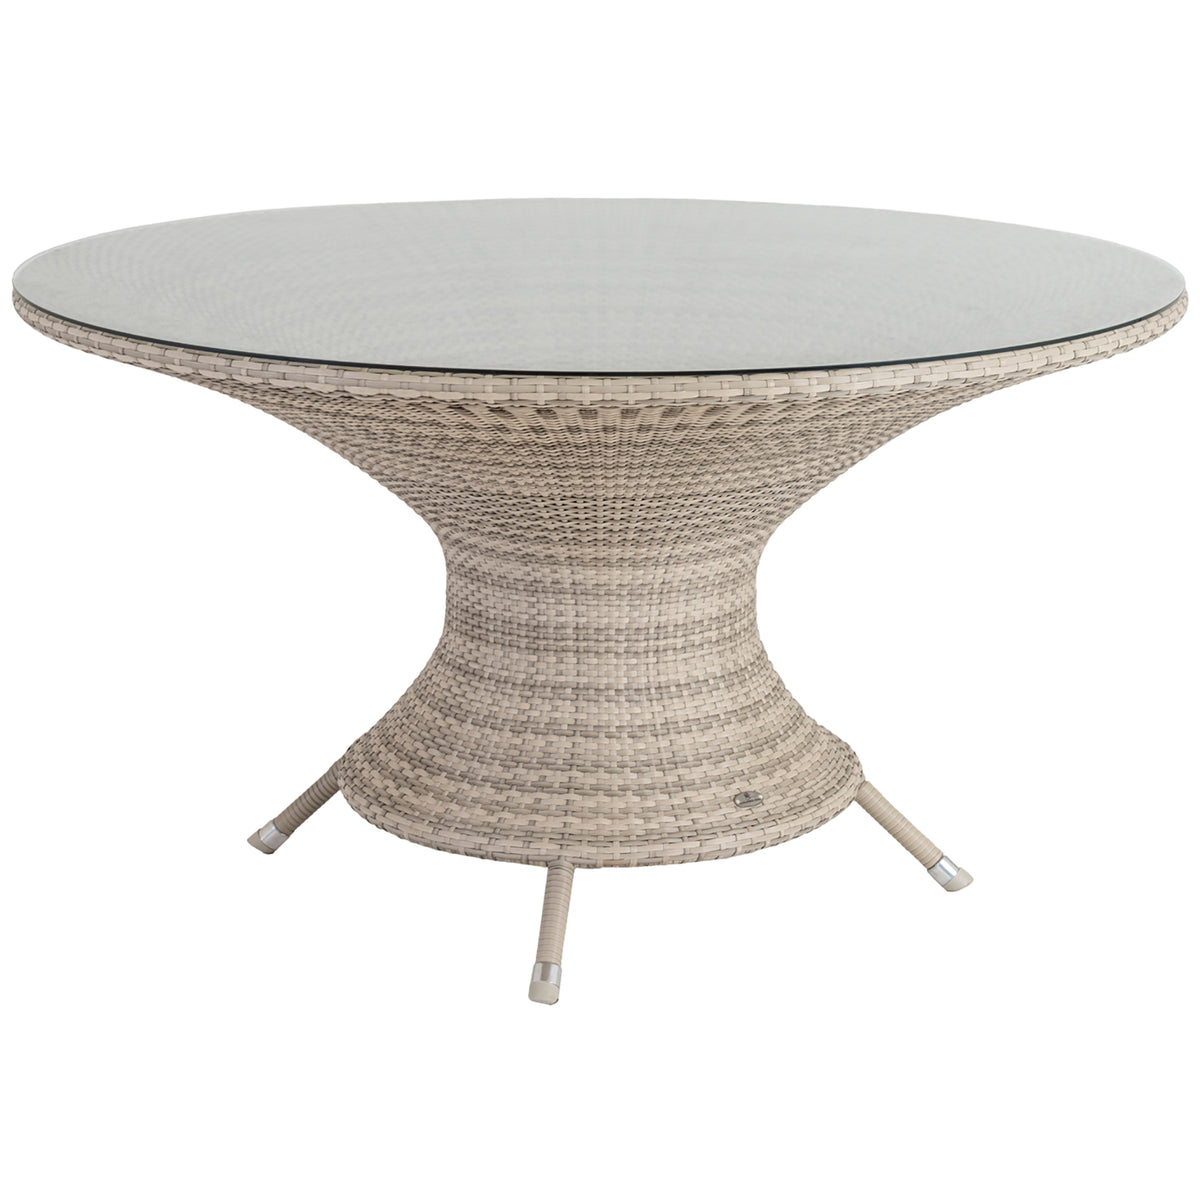 Alexander Rose Ocean Pearl Round Table with Glass (1.3m)